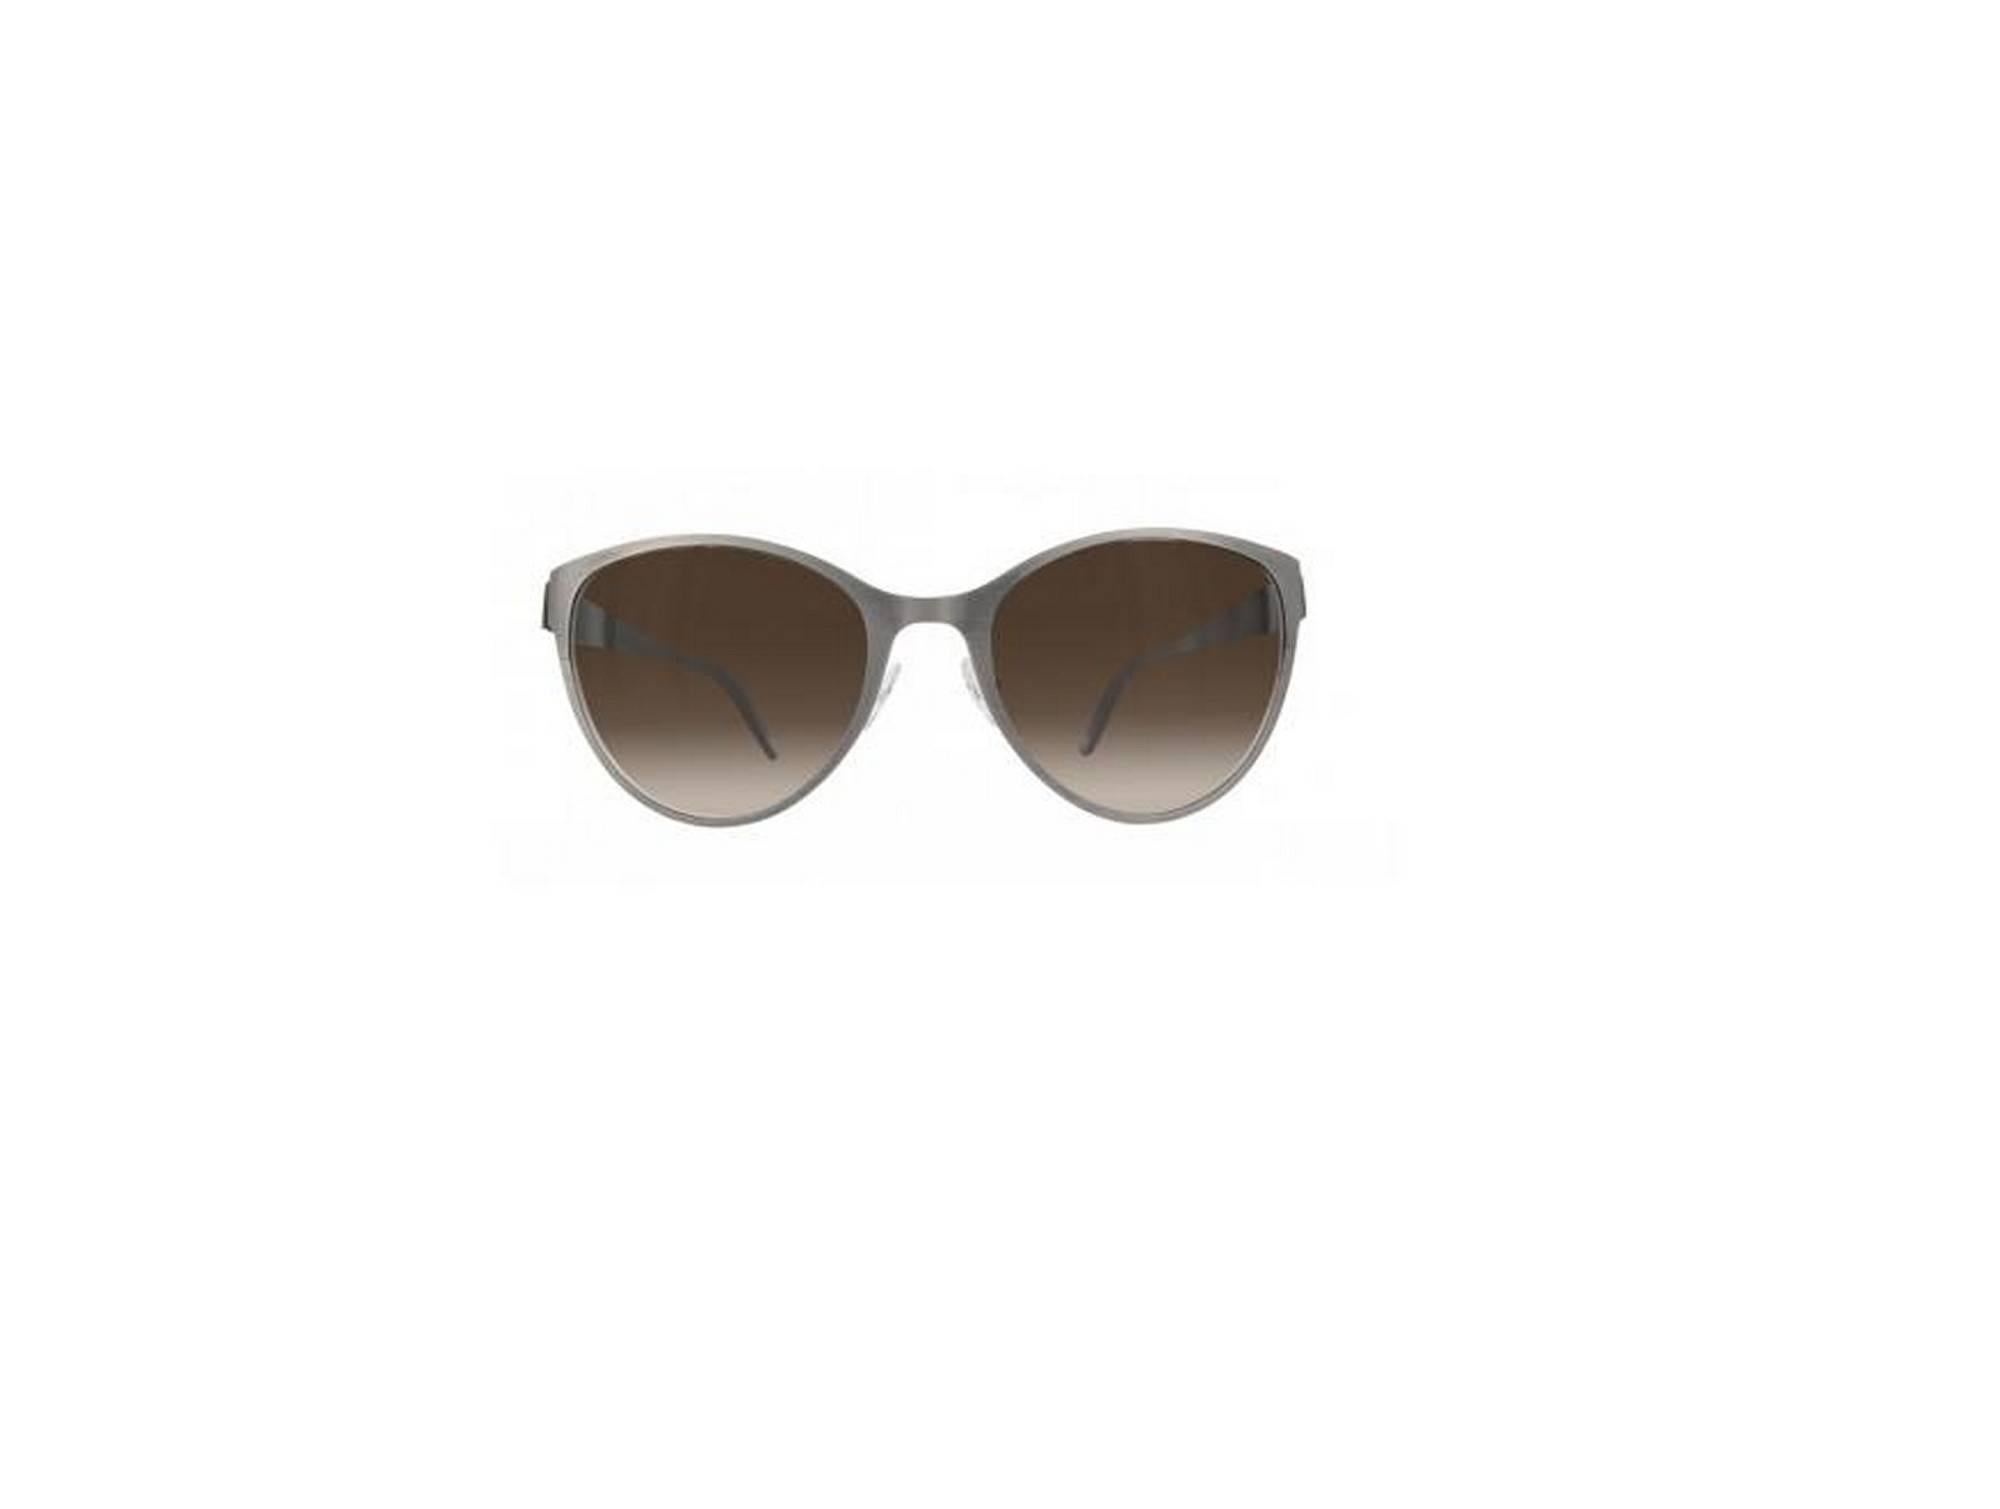 Bottega Veneta BV261S-4FA0D-56 Silver / Brown Sunglasses

Frame: Metal
Brand new with original case and cleaning cloth.
Made in Italy